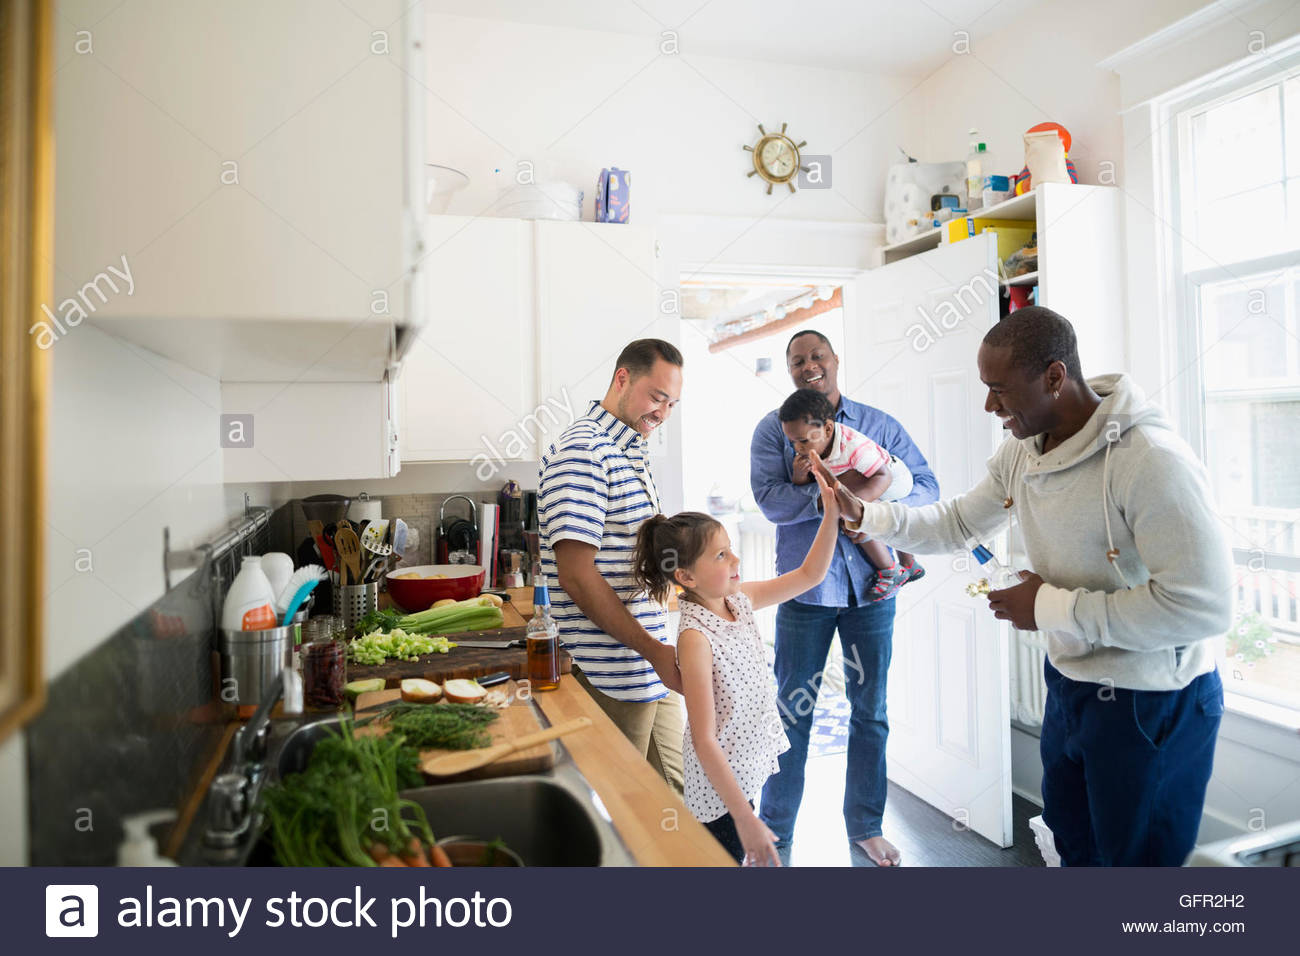 Fathers and children high fiving in kitchen Stock Photo